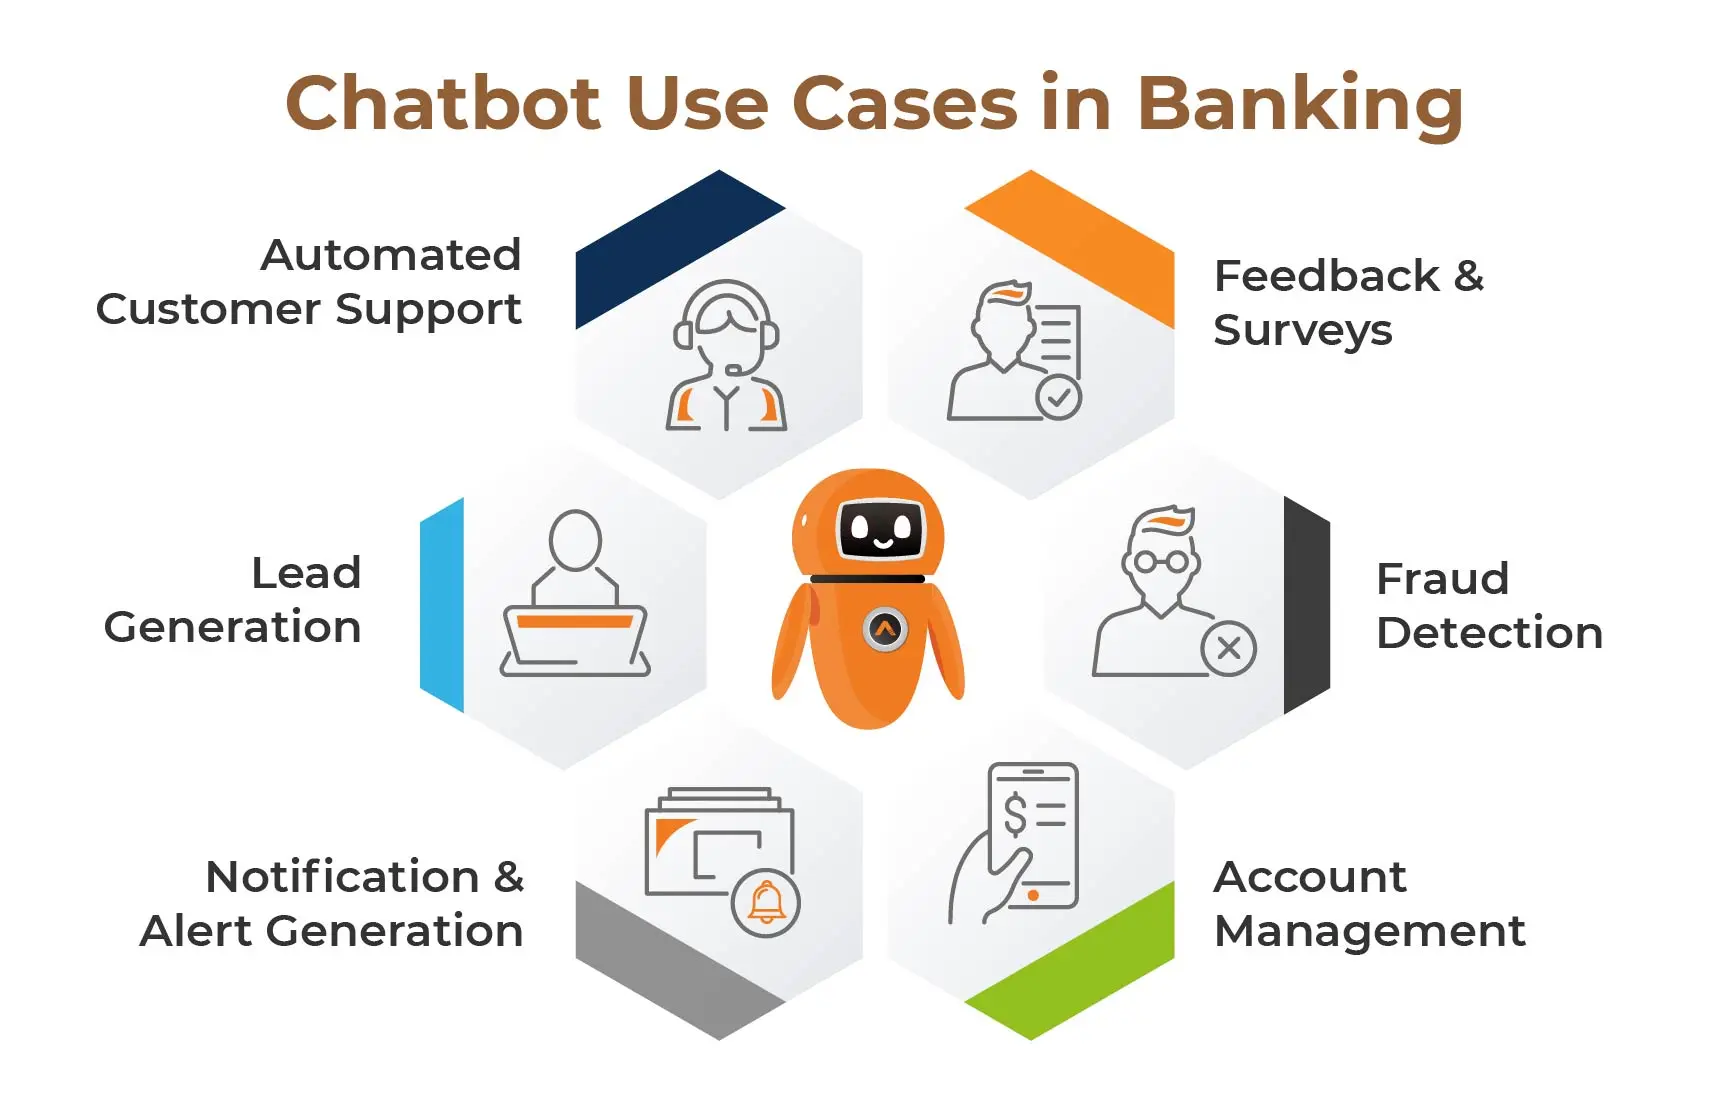 Chatbot Use Cases in Banking